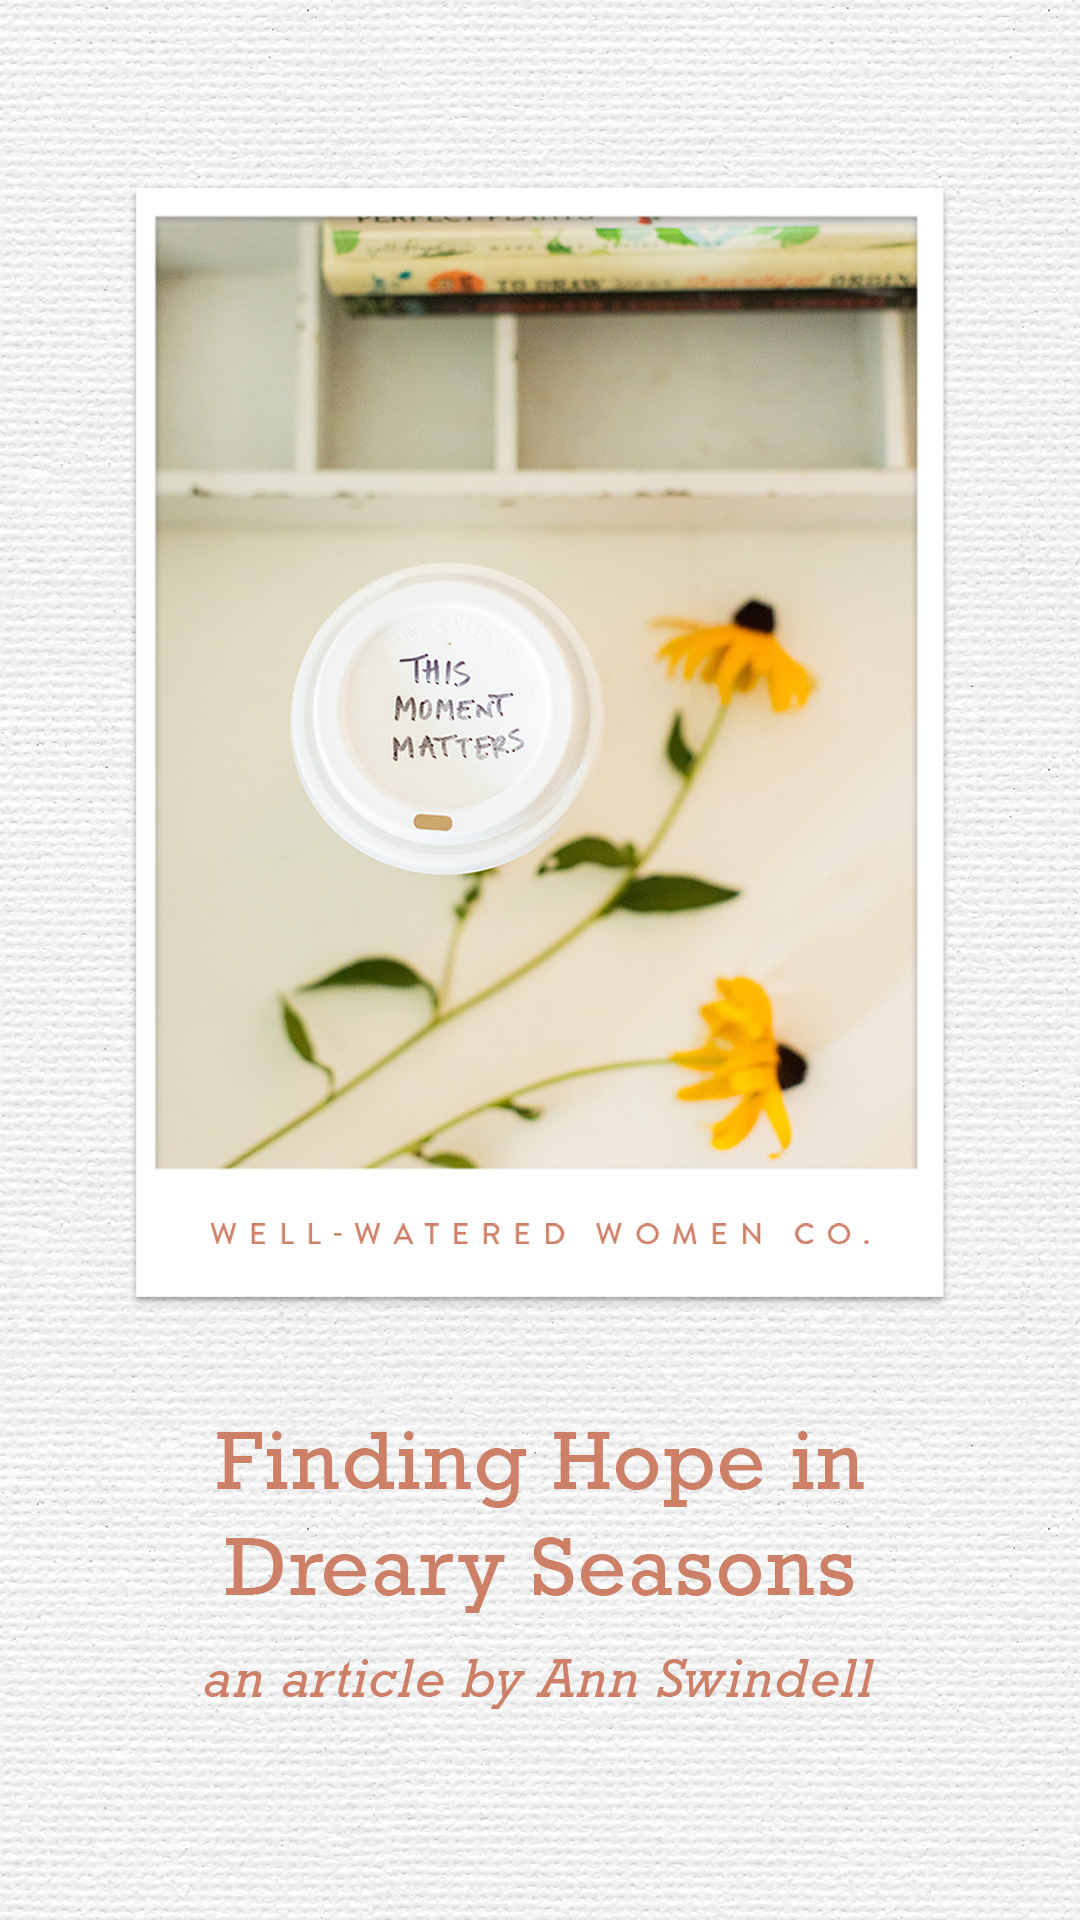 Finding Hope in Dreary Seasons-an Article from Well-Watered Women